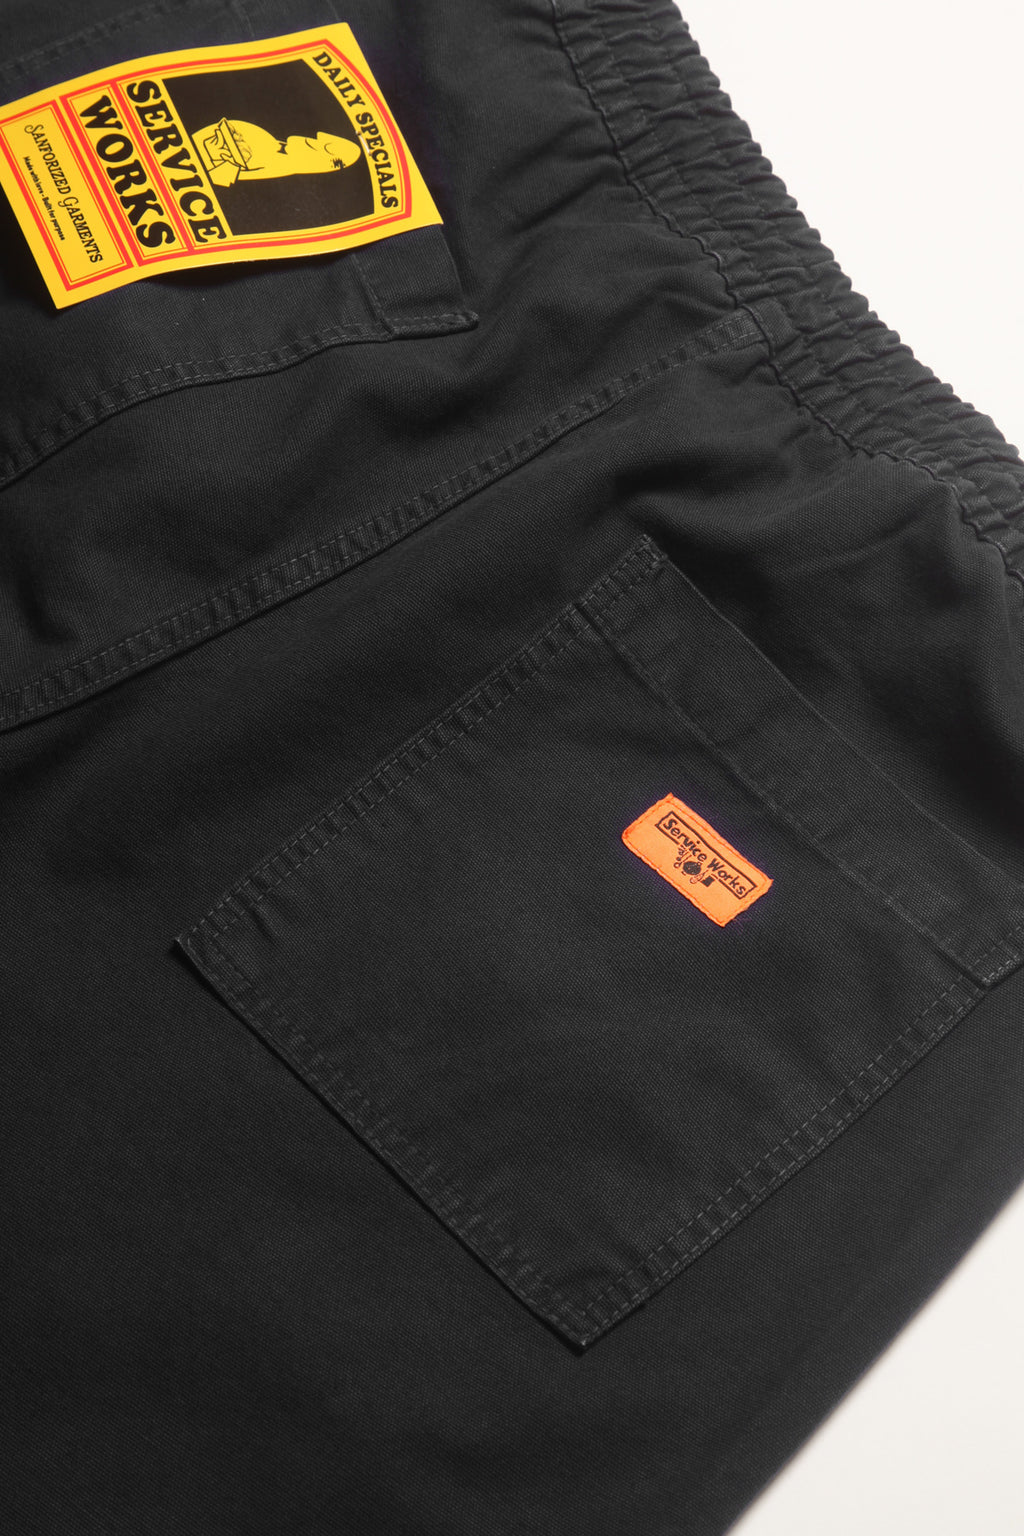 Service Works - Classic Chef Shorts - Black